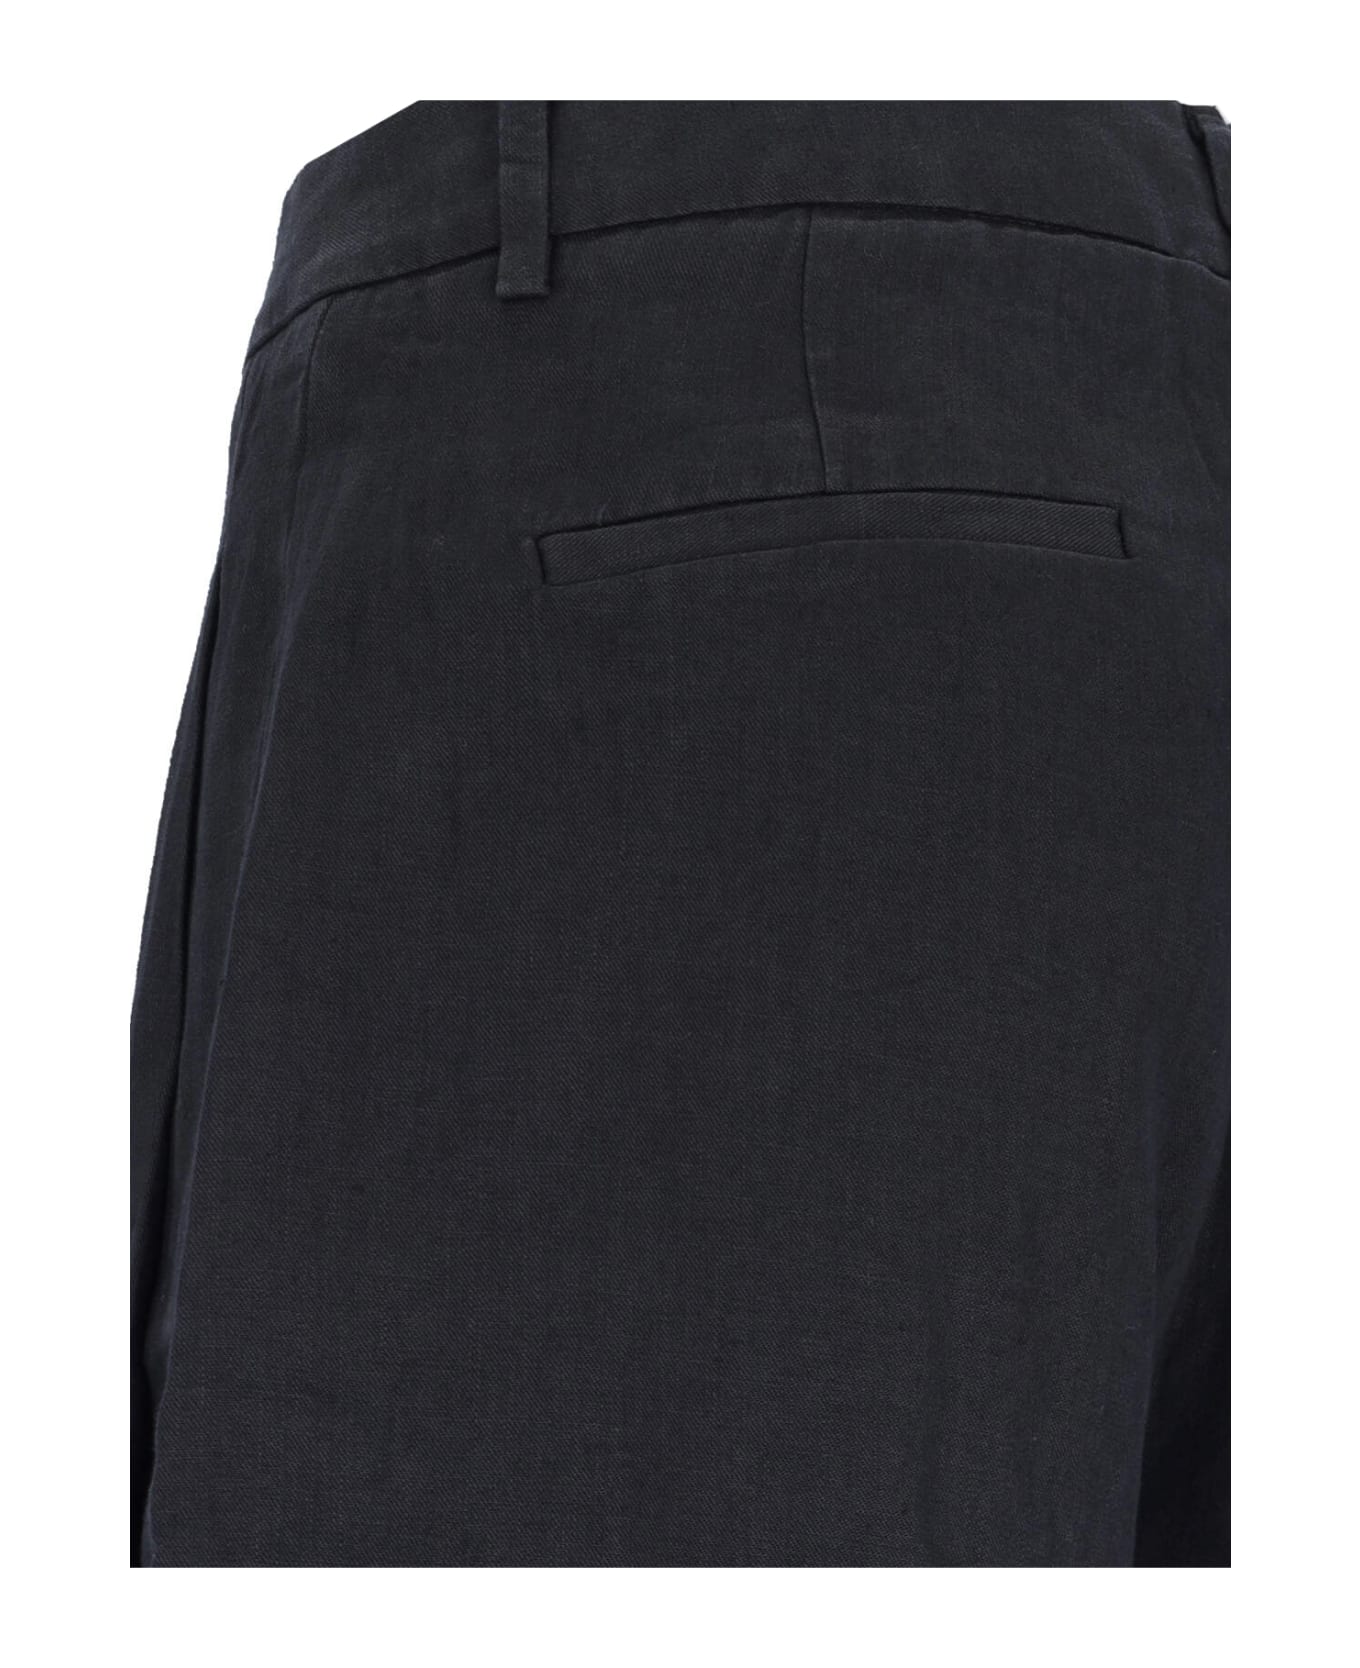 Sibel Saral Monfil Navy Trousers - Blue ボトムス